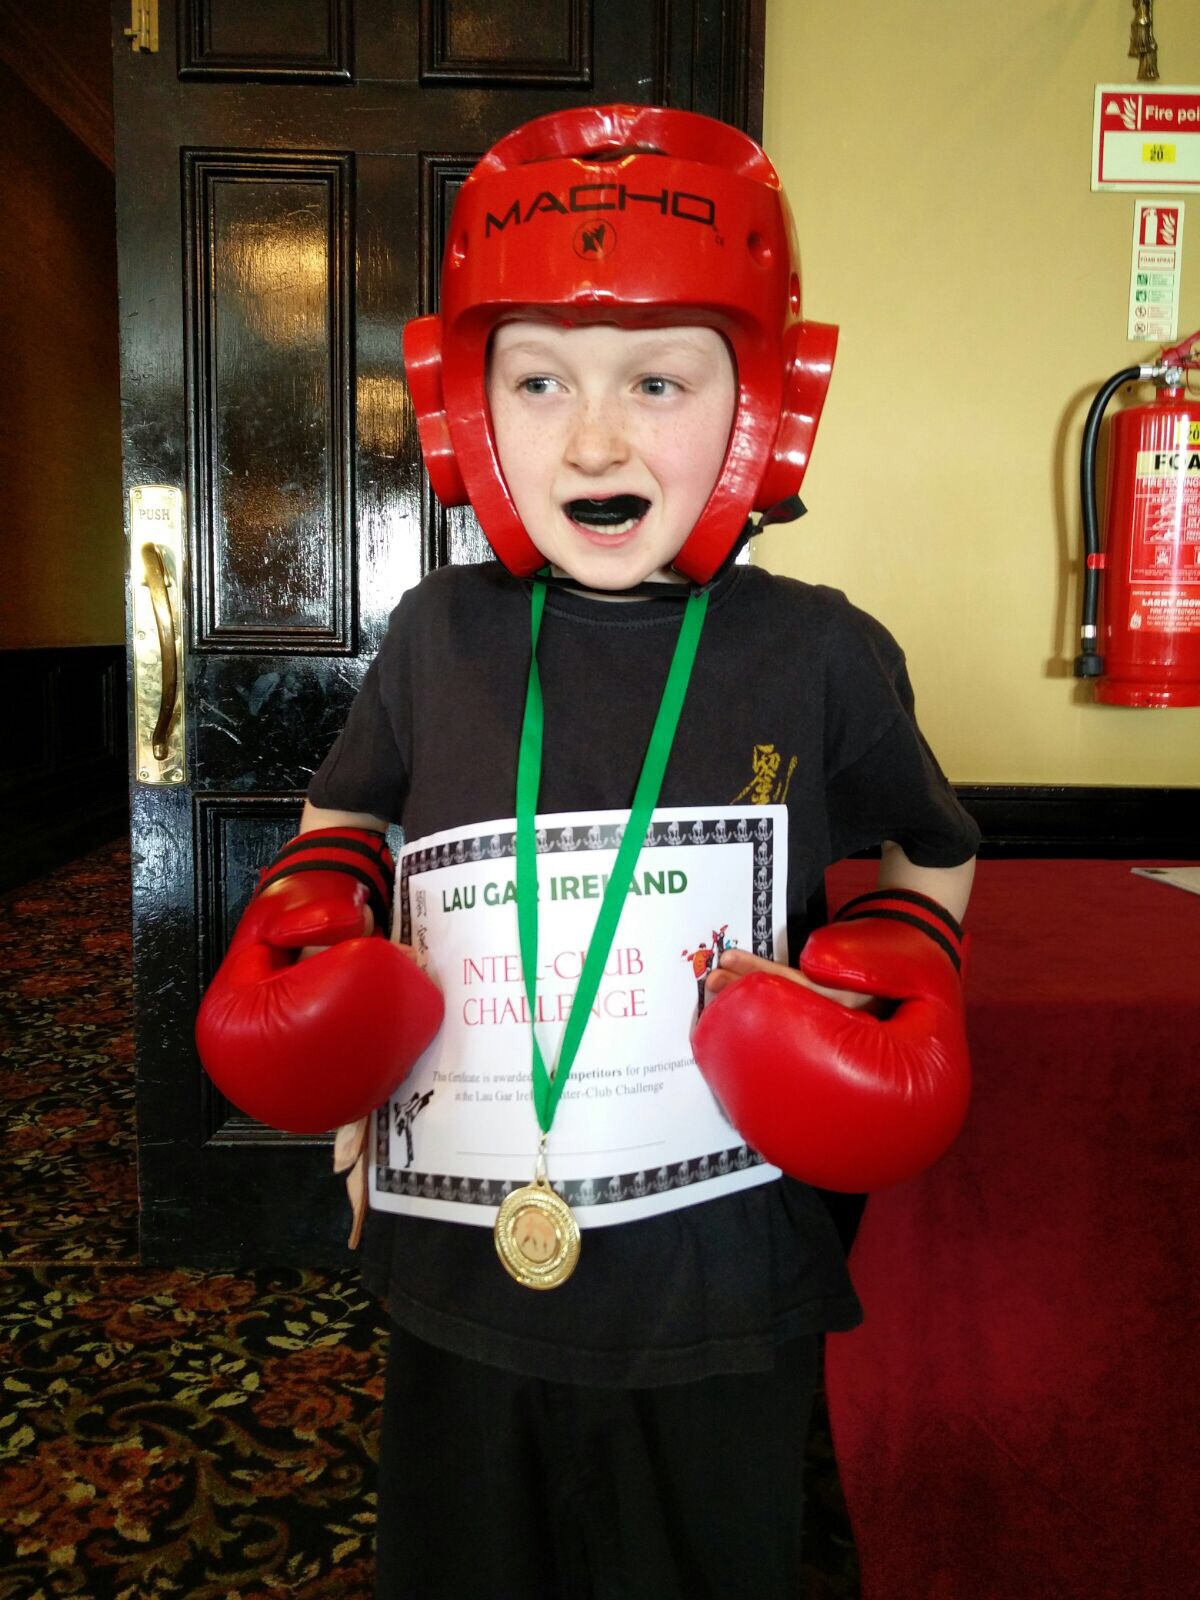 Ciarin Maree, 1st place boys novice, at the recent Interclub Competition